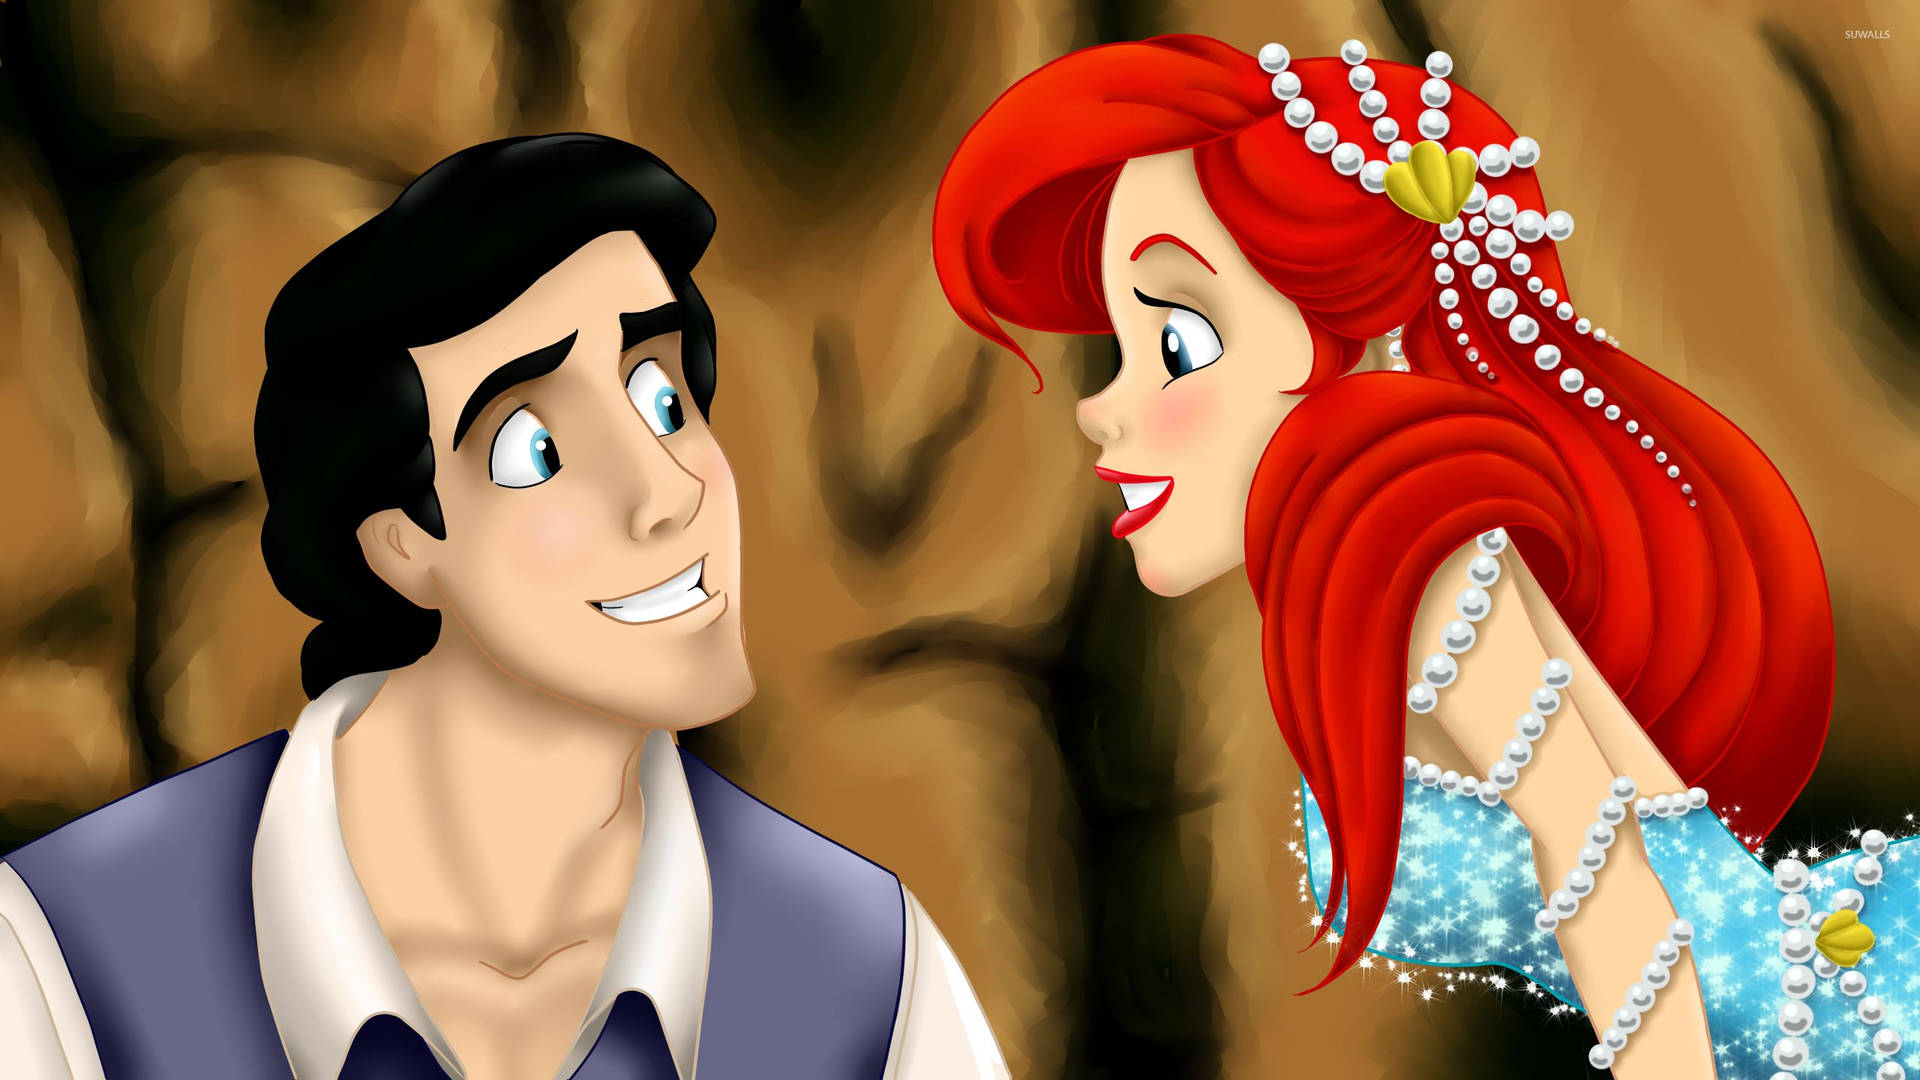 Prince Eric And Ariel The Little Mermaid